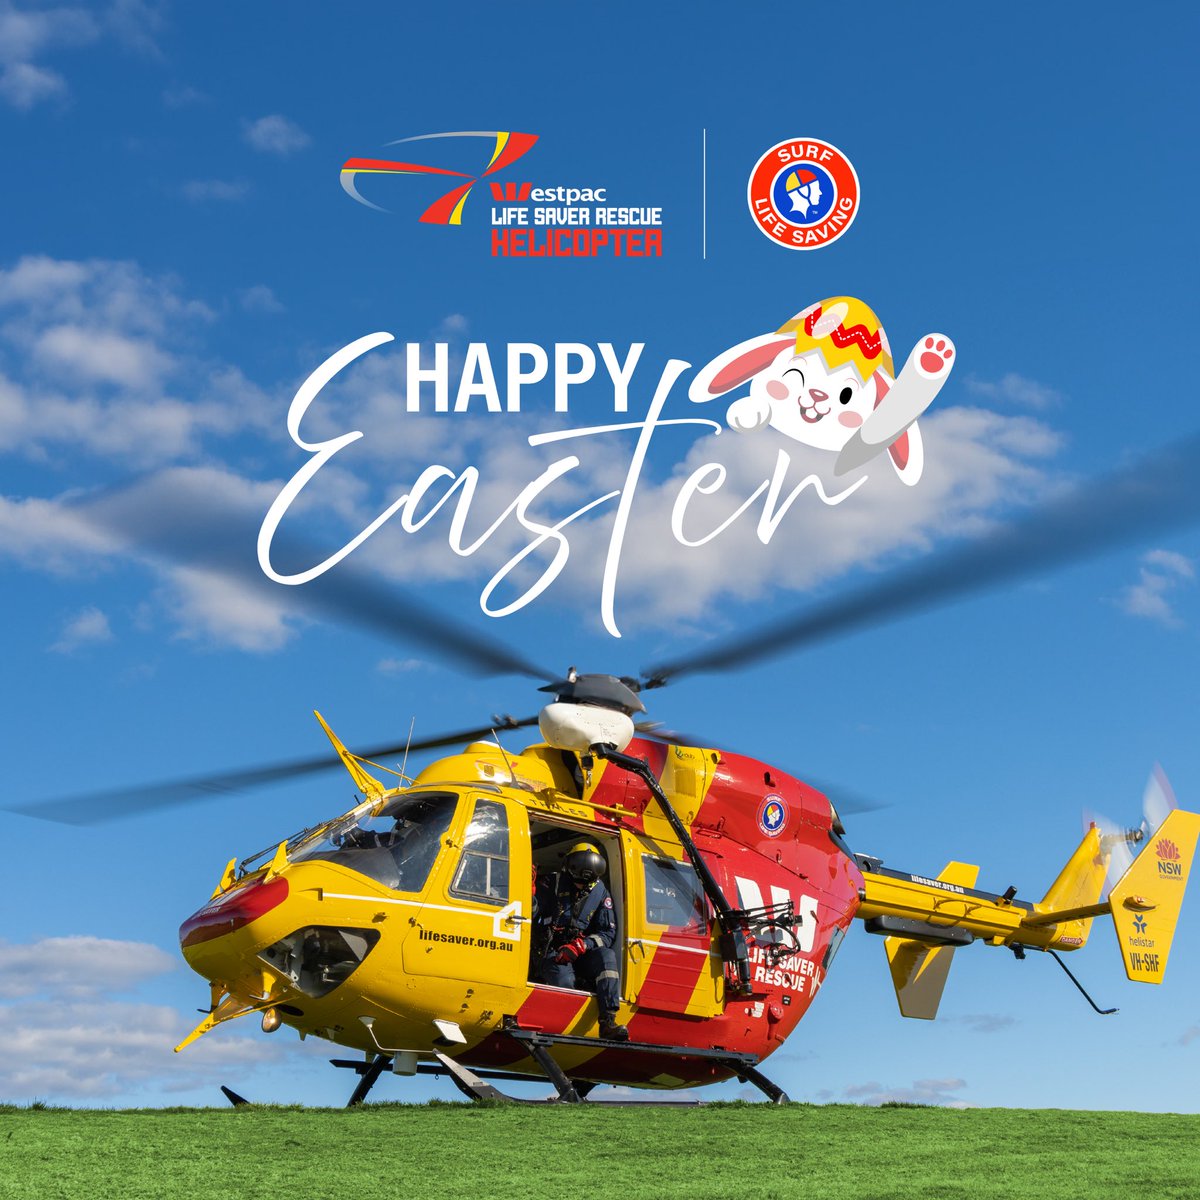 On behalf of all of our crew, we wish everyone a happy & safe Easter! #1 tip; hunting for some eggs at the beach today, the best places to look are between the red & yellow flags. 🏖️ Visit beachsafe.org.au to find your closest patrolled location 🐰 #lifesaverhelo